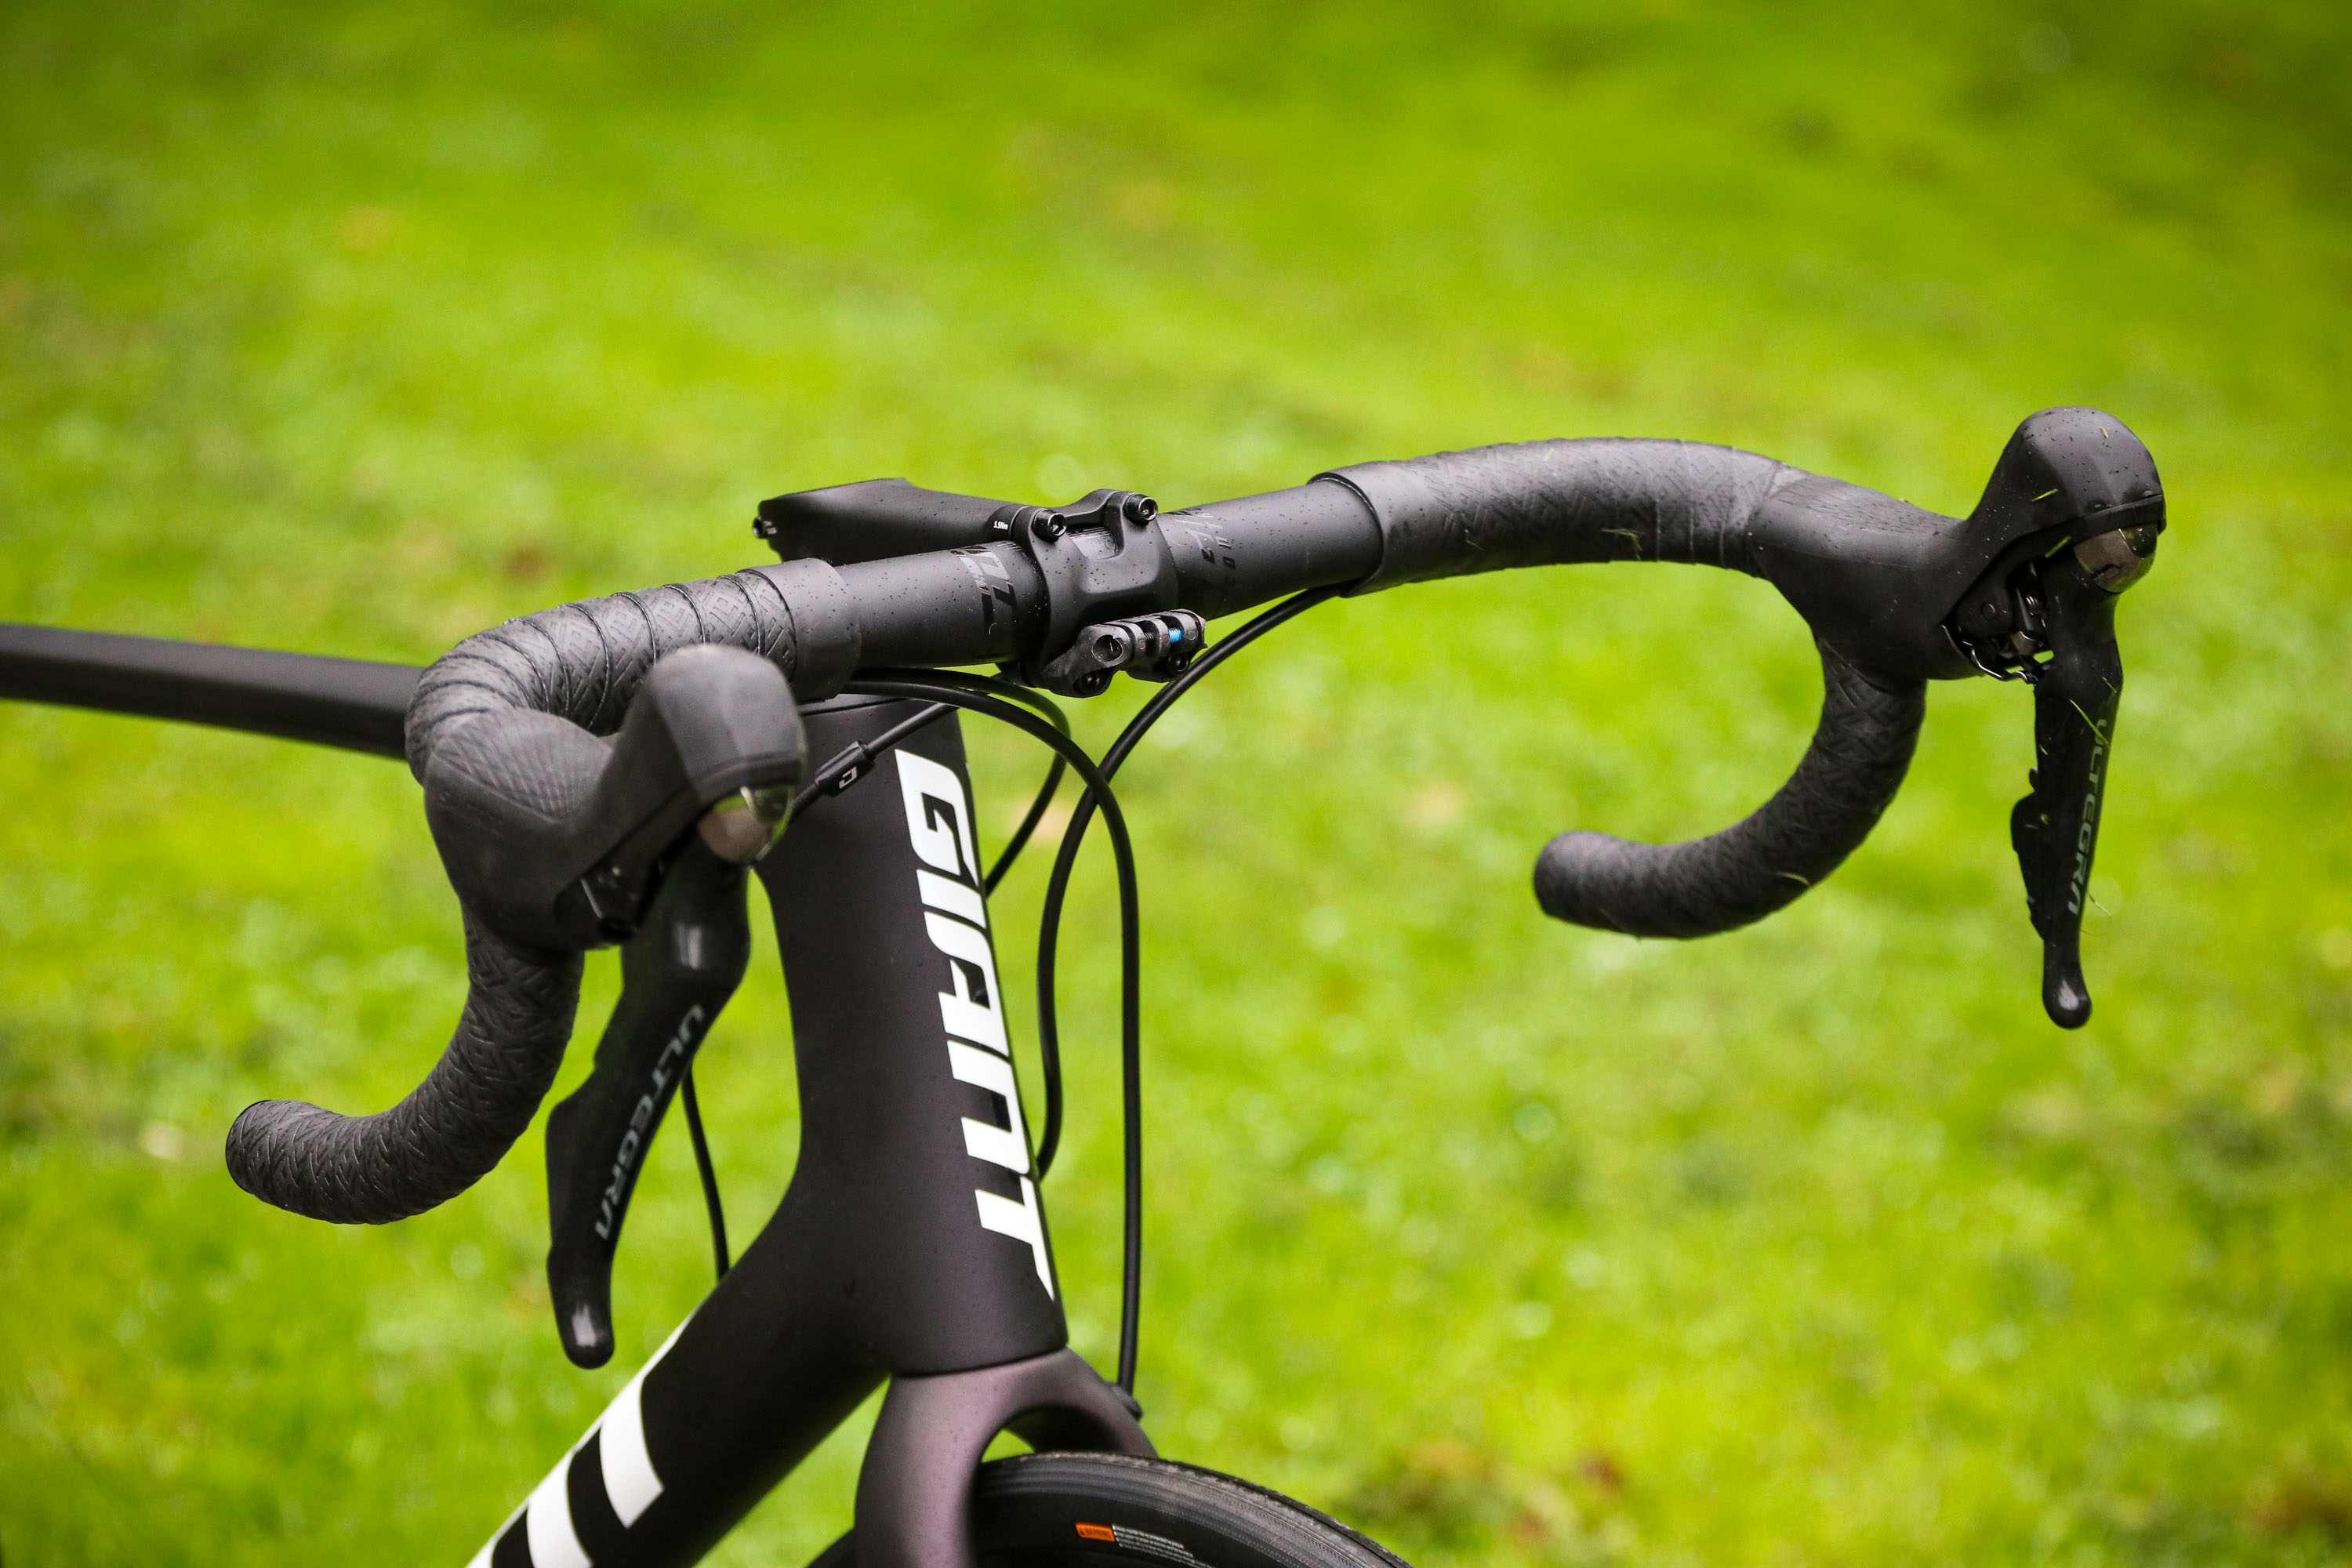 giant tcr advanced pro 1 review